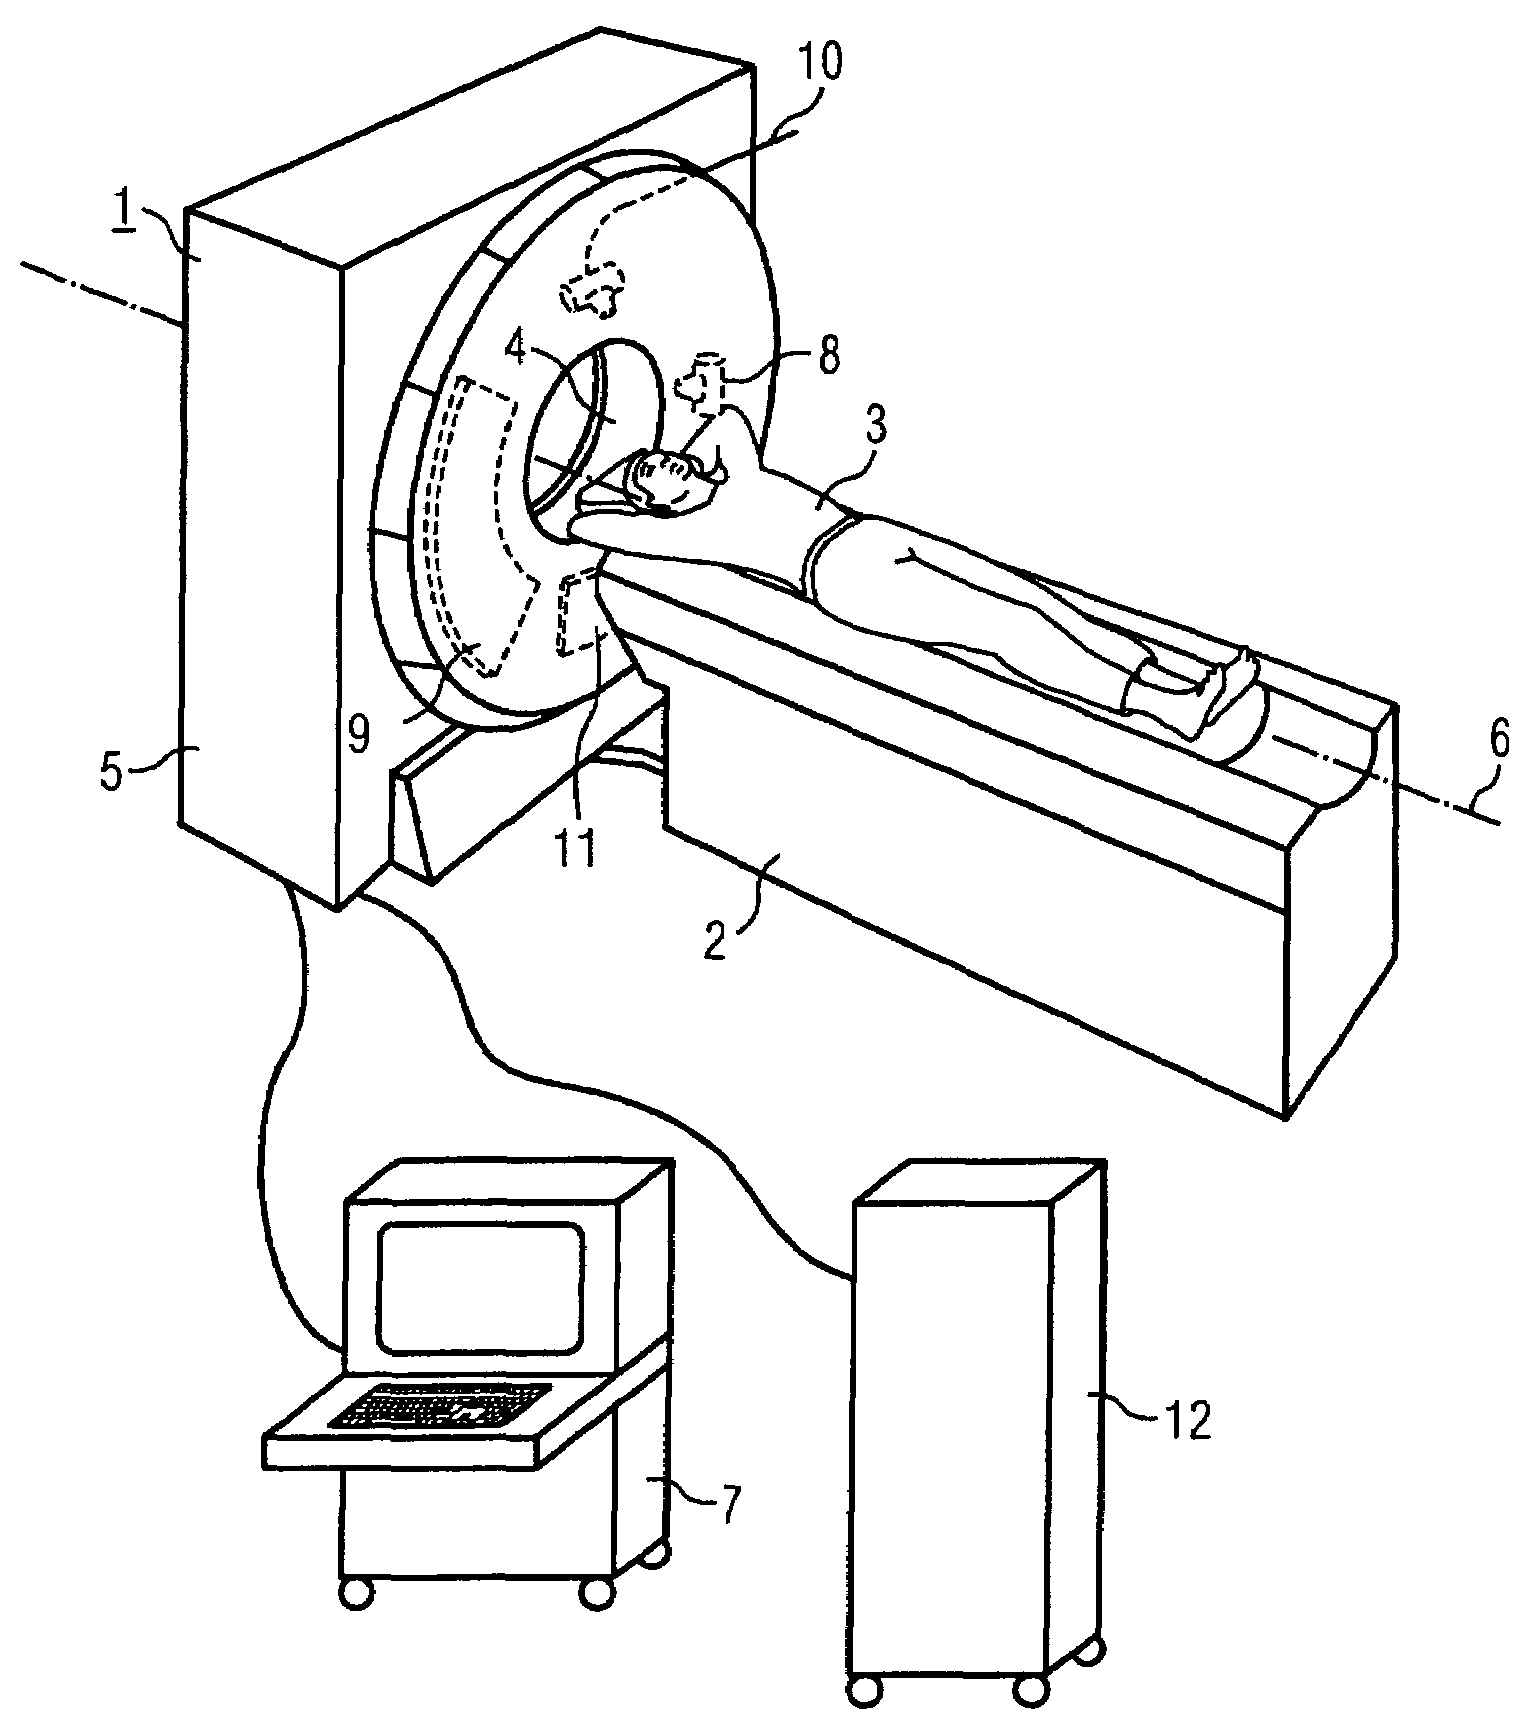 Method for recording and evaluating image data with the aid of a tomography machine